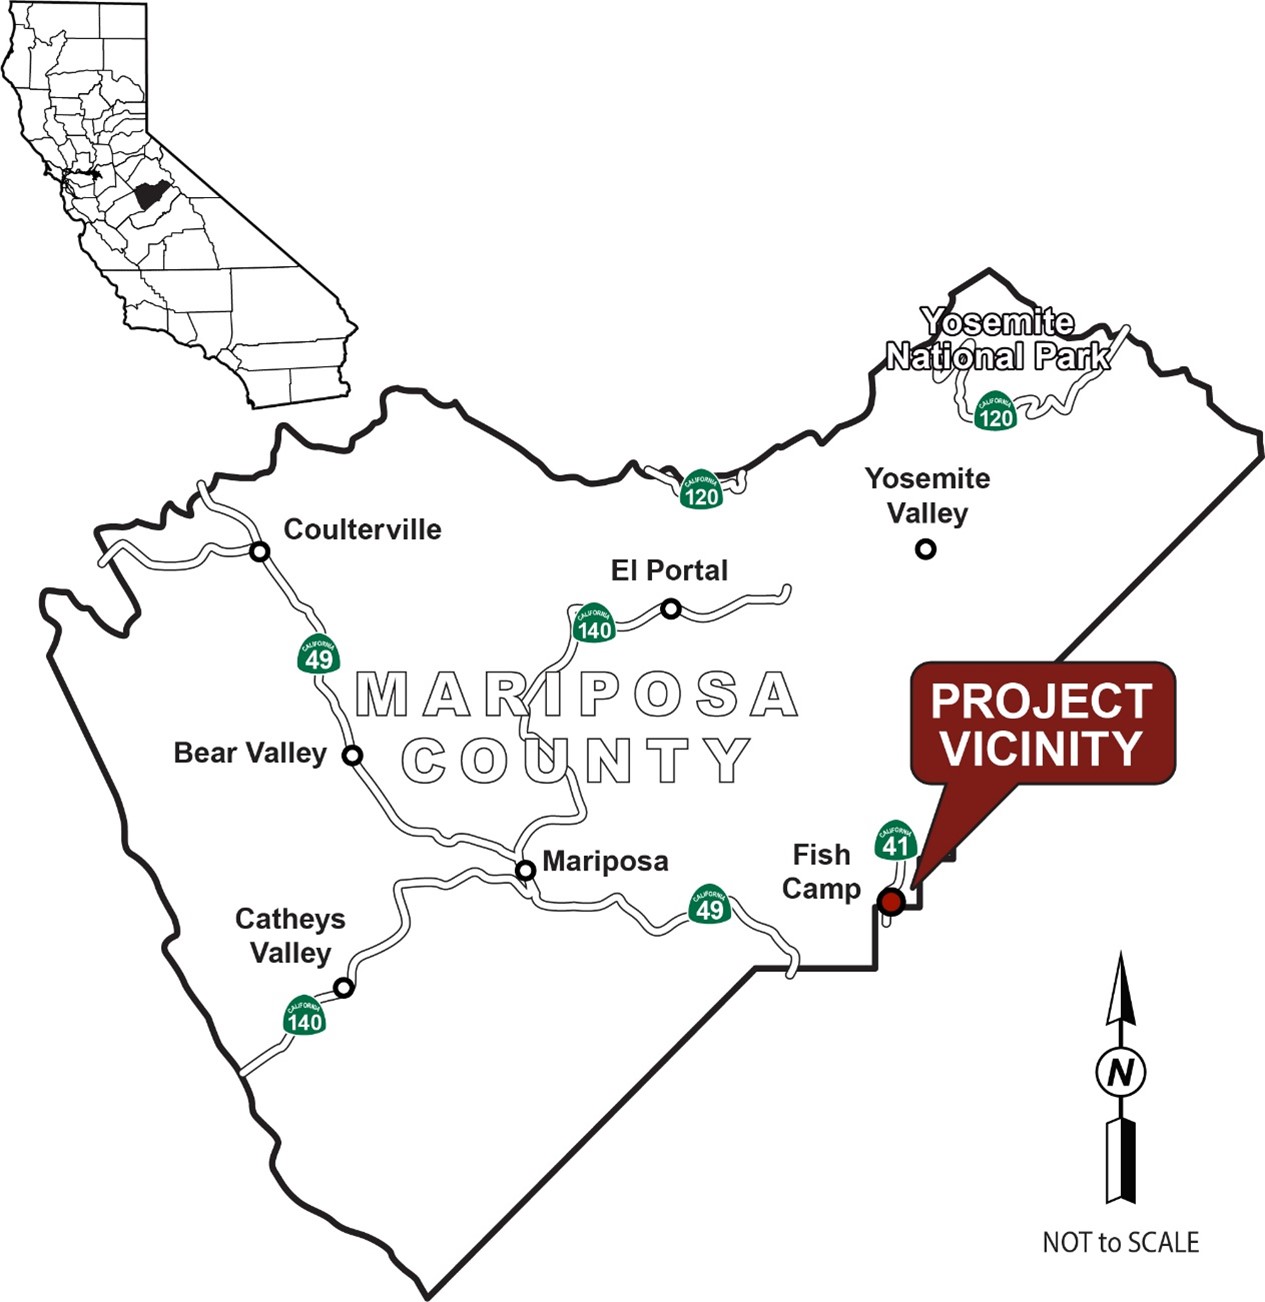 Map showing the vicinity of the project in Mariposa County on State Route 41 near Fish Camp